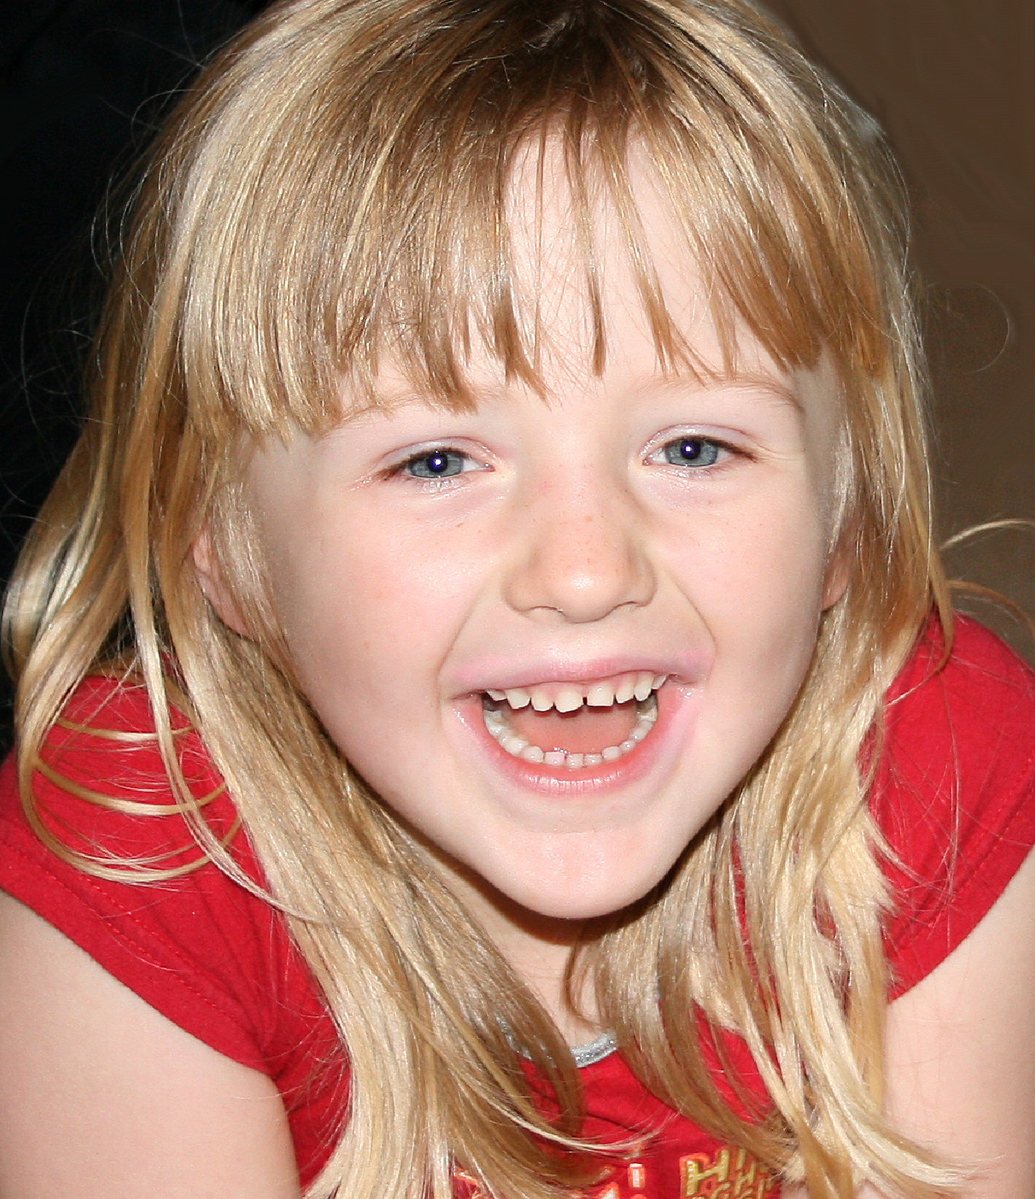 a child with blond hair, sitting on a couch smiling